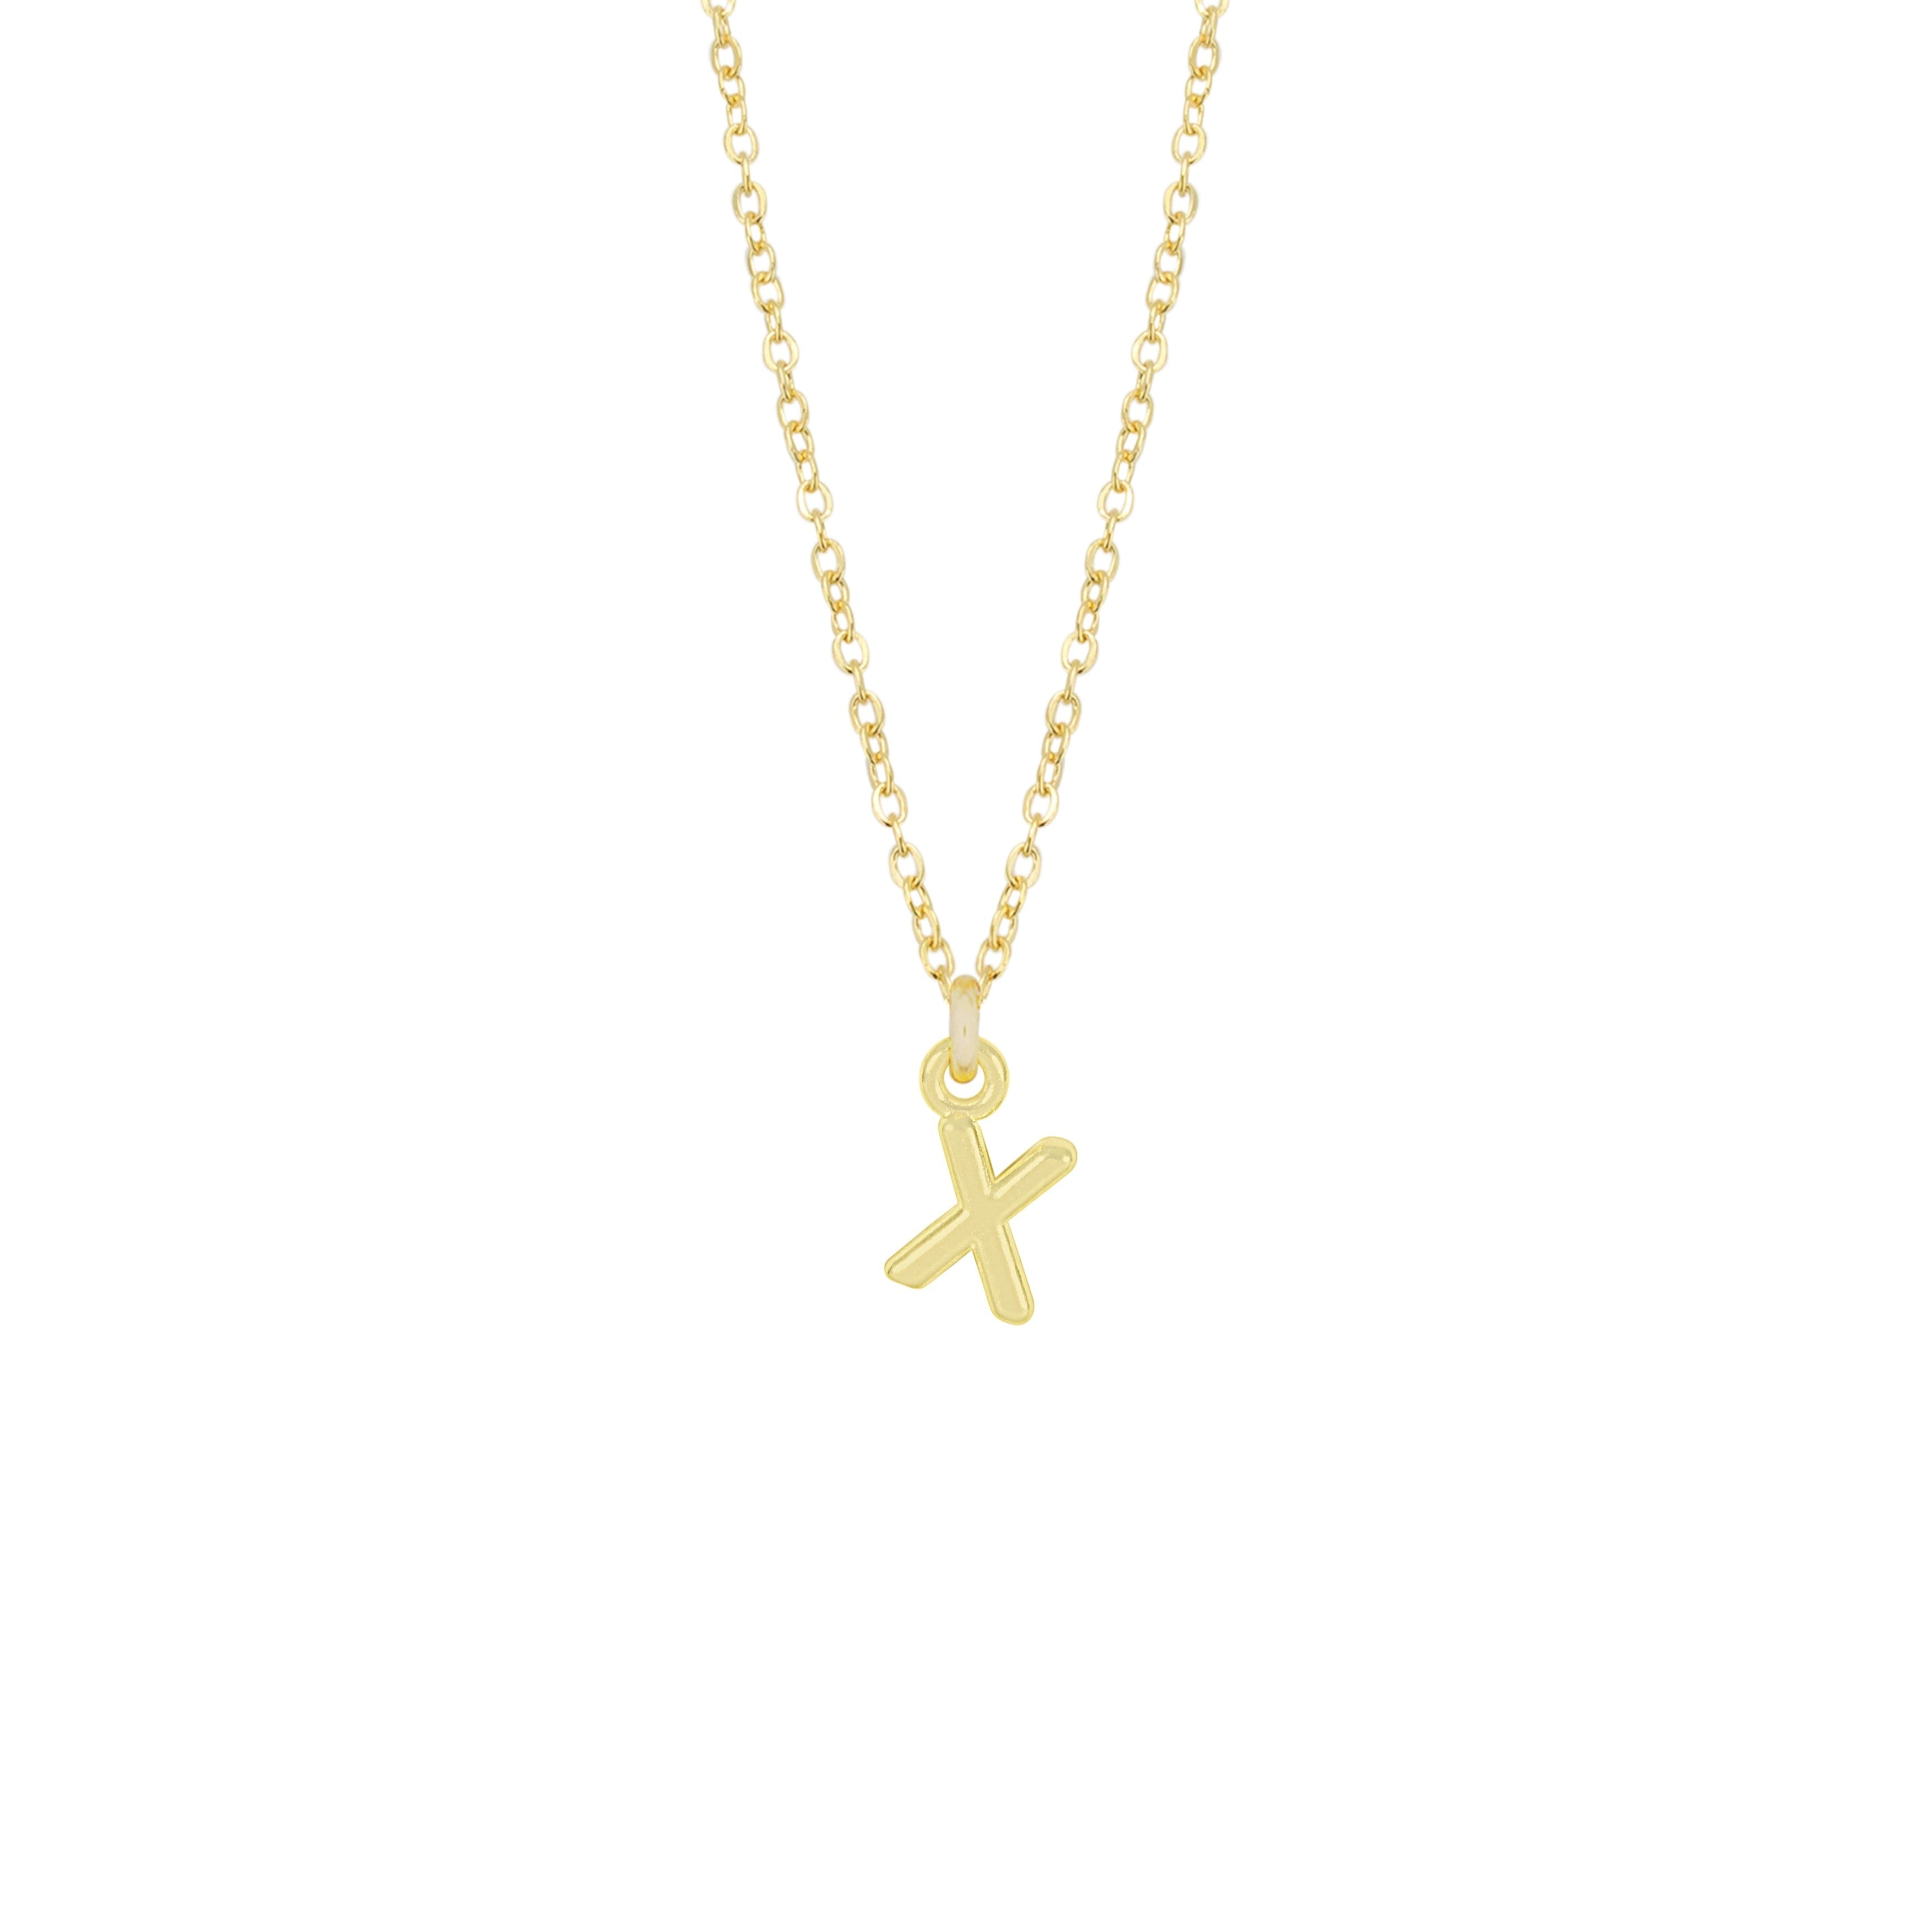 X Gold Initial Necklace by Katie Dean Jewelry, made in America, perfect for the dainty minimal jewelry lovers